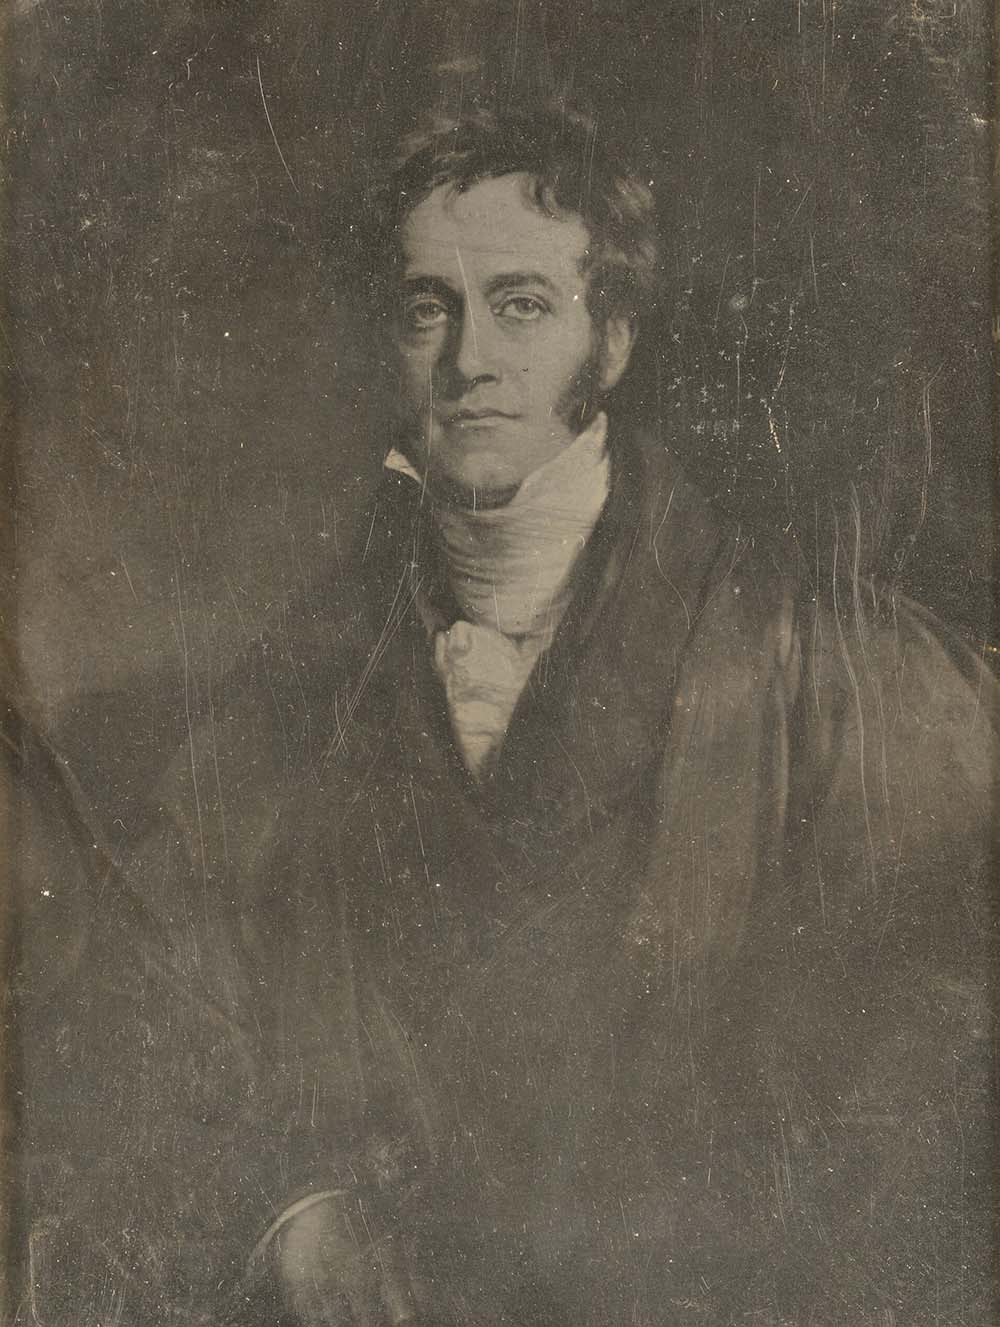 Daguerreotype of a painting of an unidentified man, American, c. 1845.